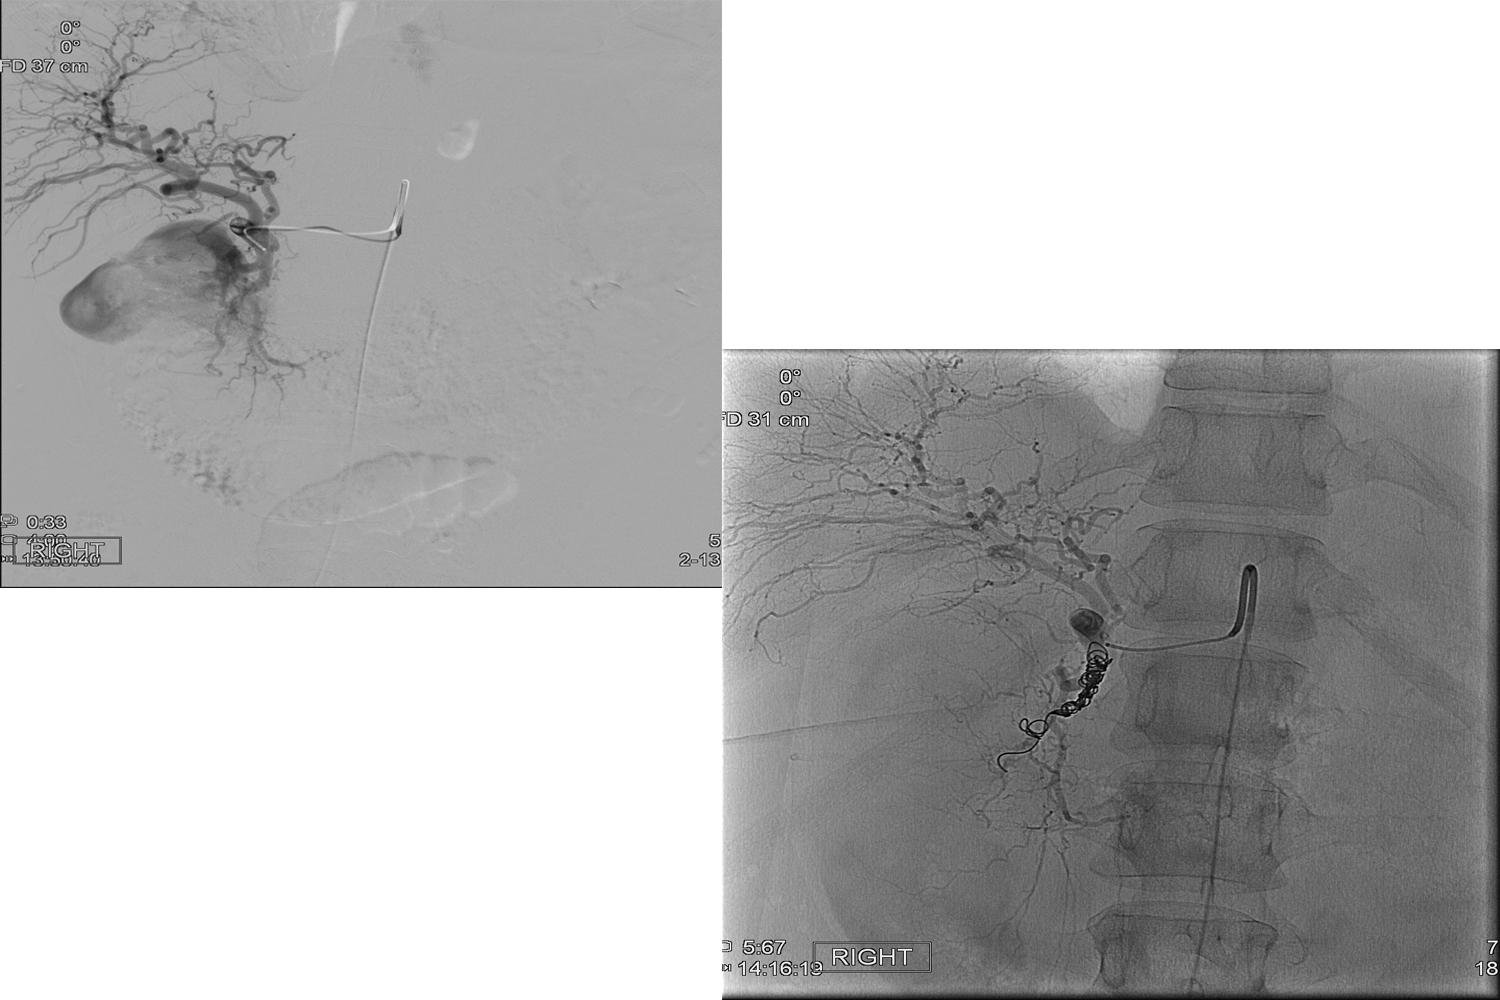 Transarterial Embolization for Upper Gastrointestinal Bleeding in a Patient with Prior Gastrododenal Artery Ligation